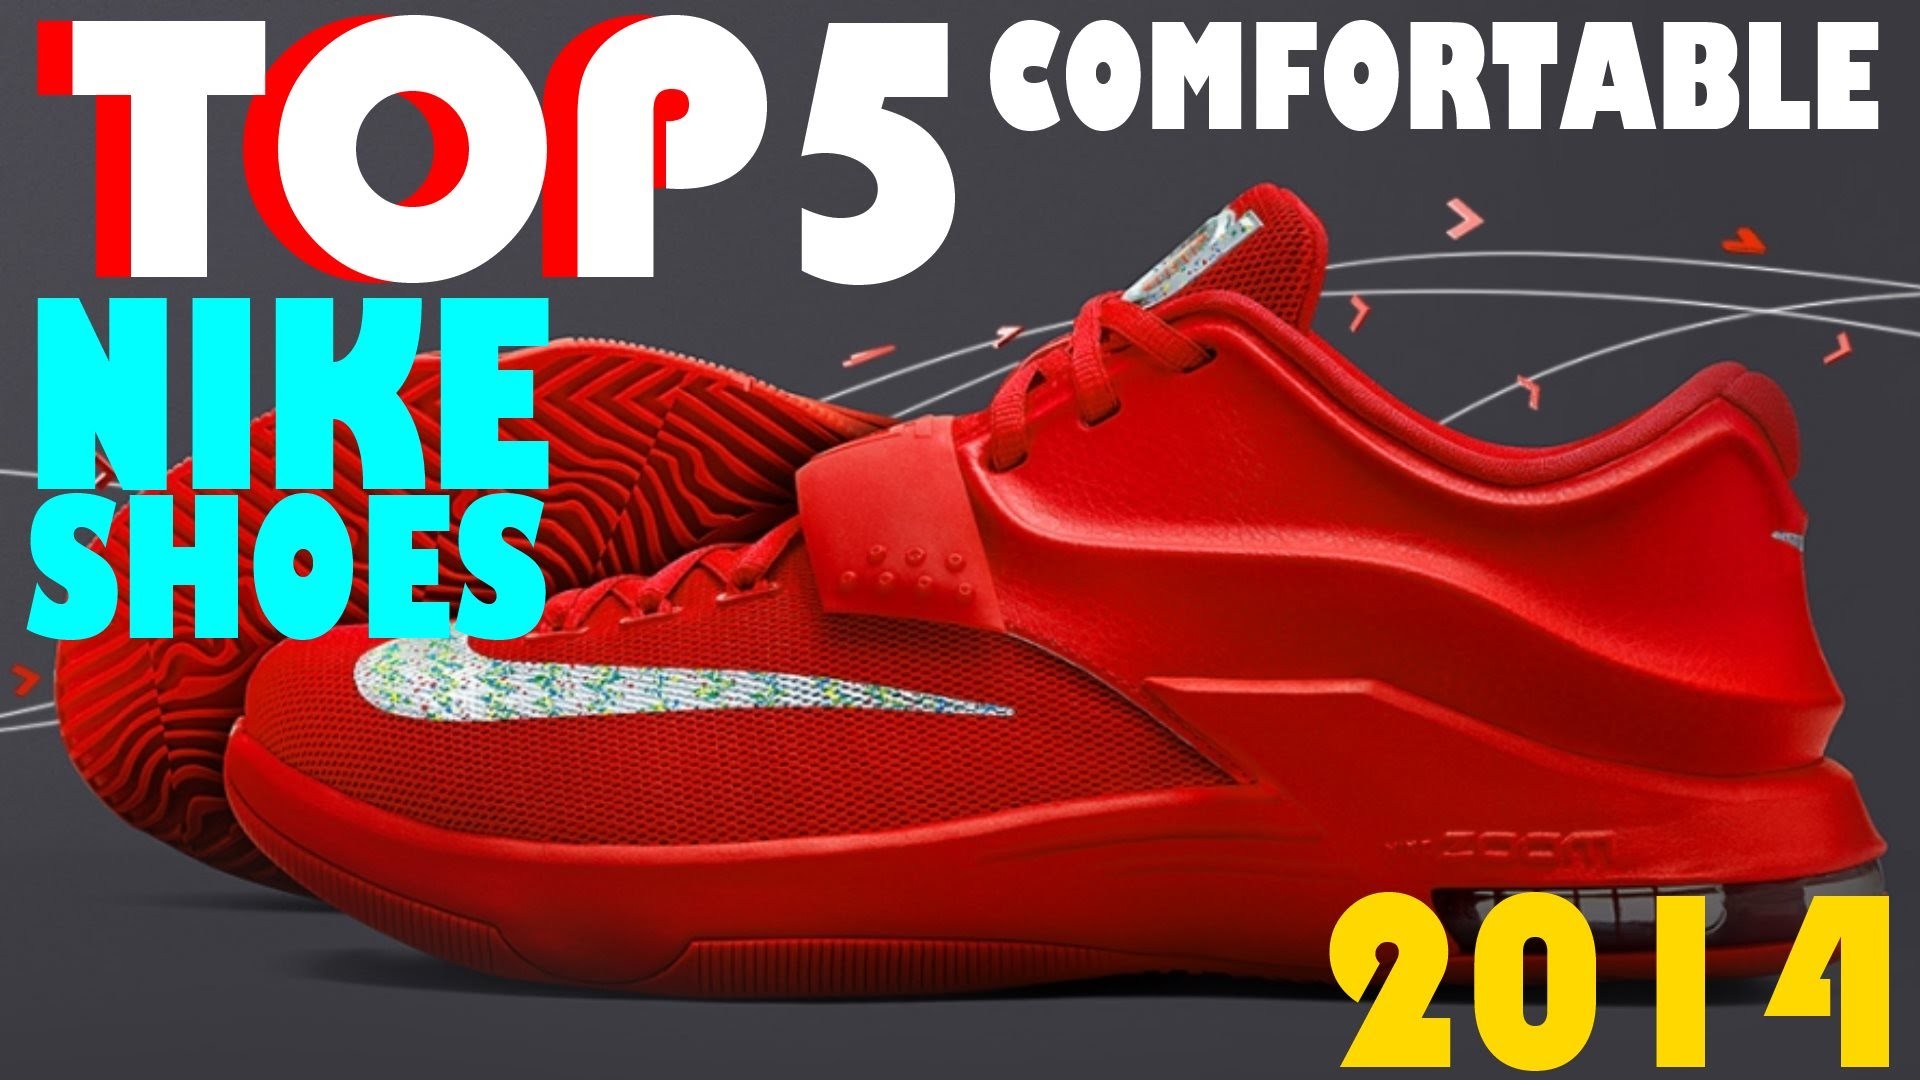 1920x1080 Top 5 Comfortable Nike Basketball Shoes Of 2014 (+Commentary) [END OF THE  YEAR] - YouTube